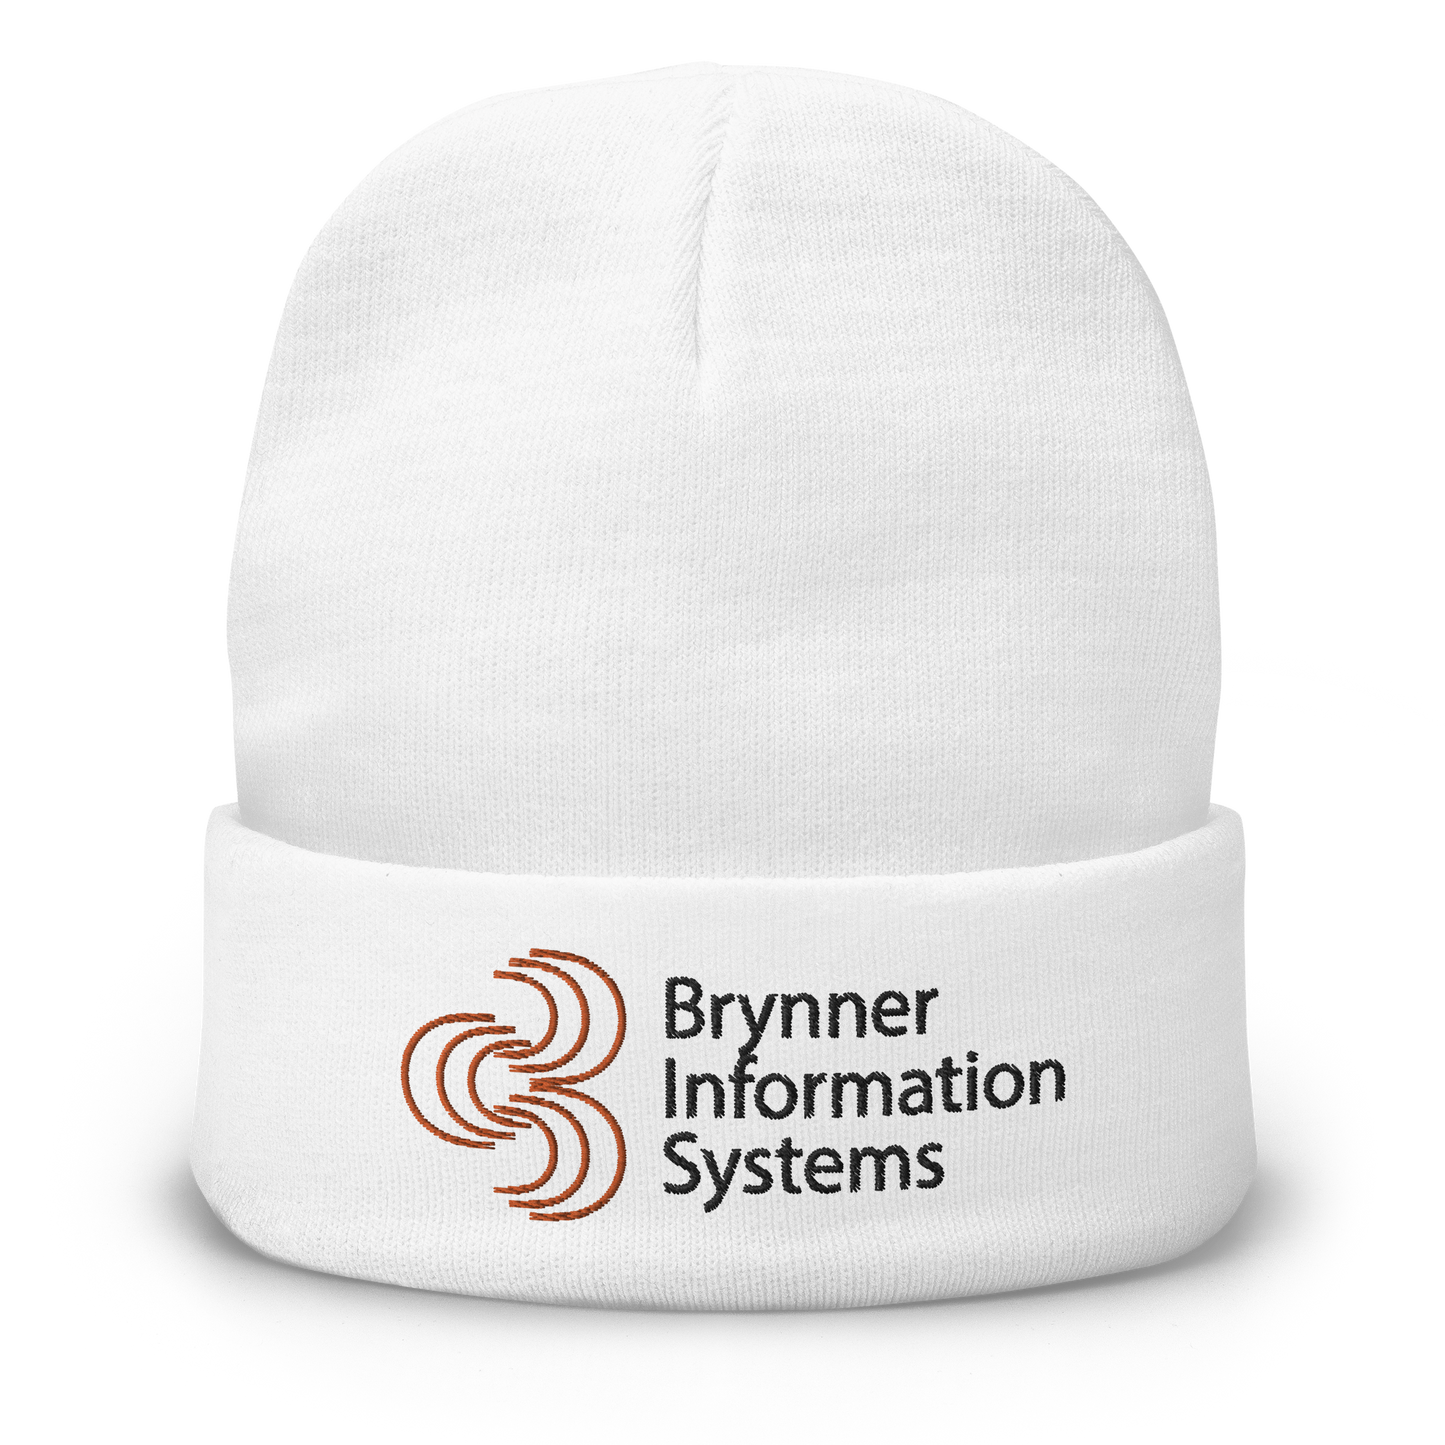 The Brynner Information Systems Beanie